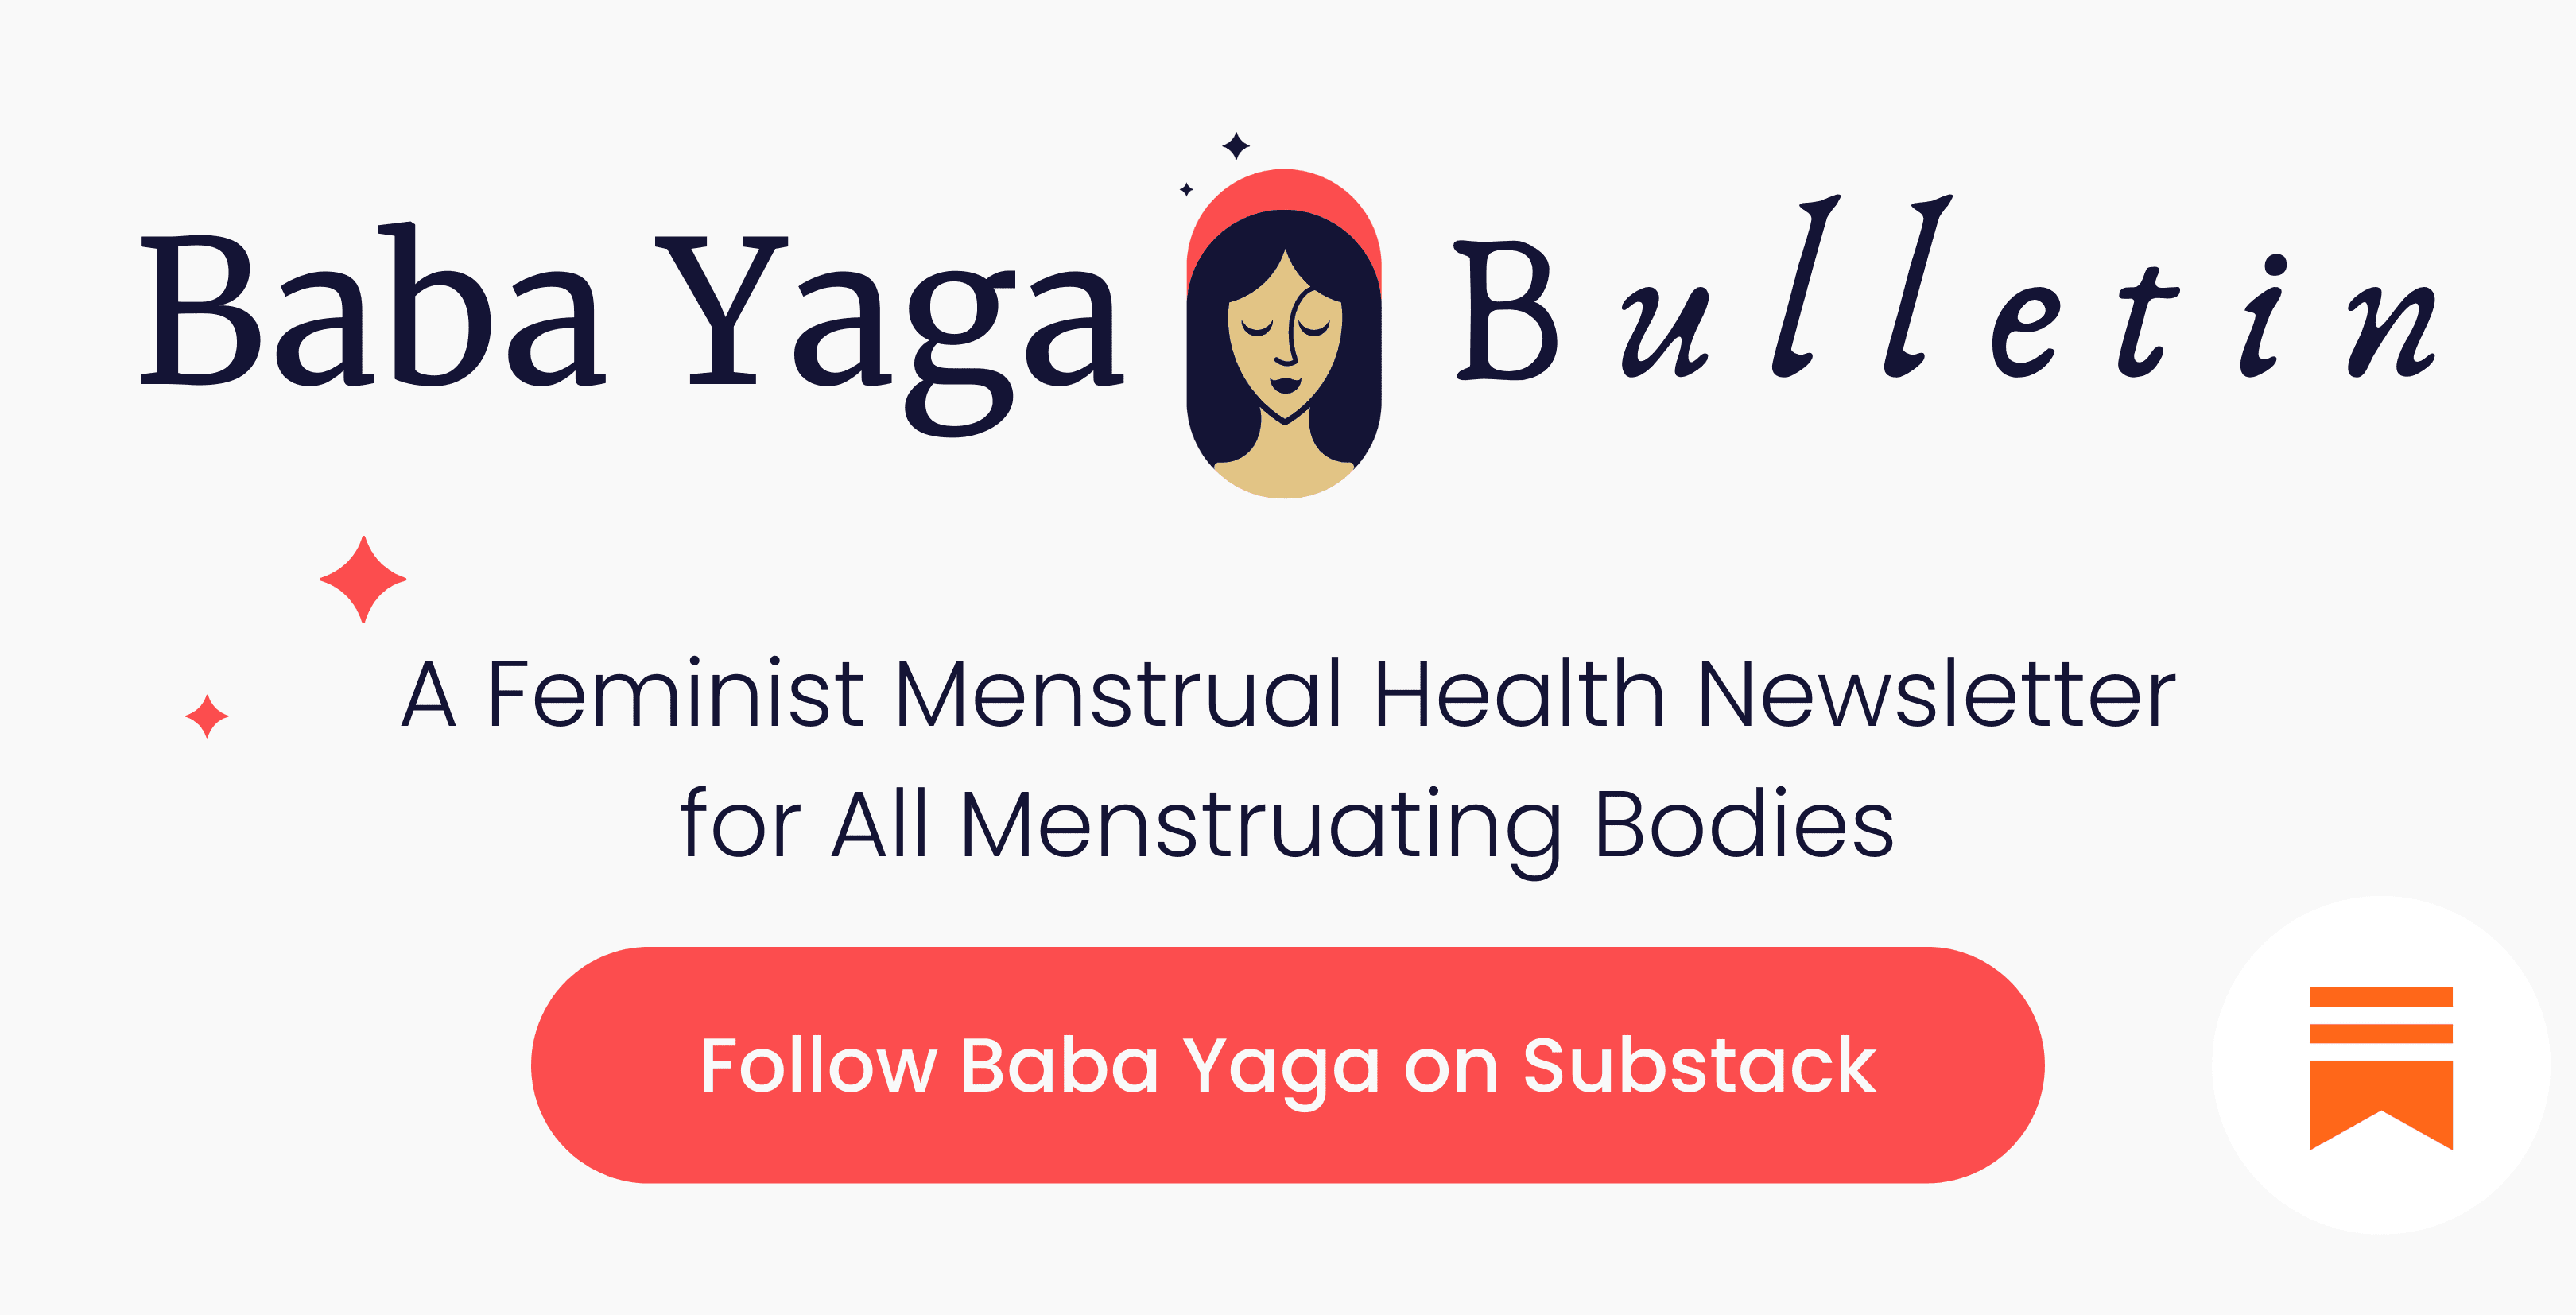 Menstrual health news, period myth busting, intersectional feminism, femtech updates, cycle breaking, and shame healing for all menstruating bodies